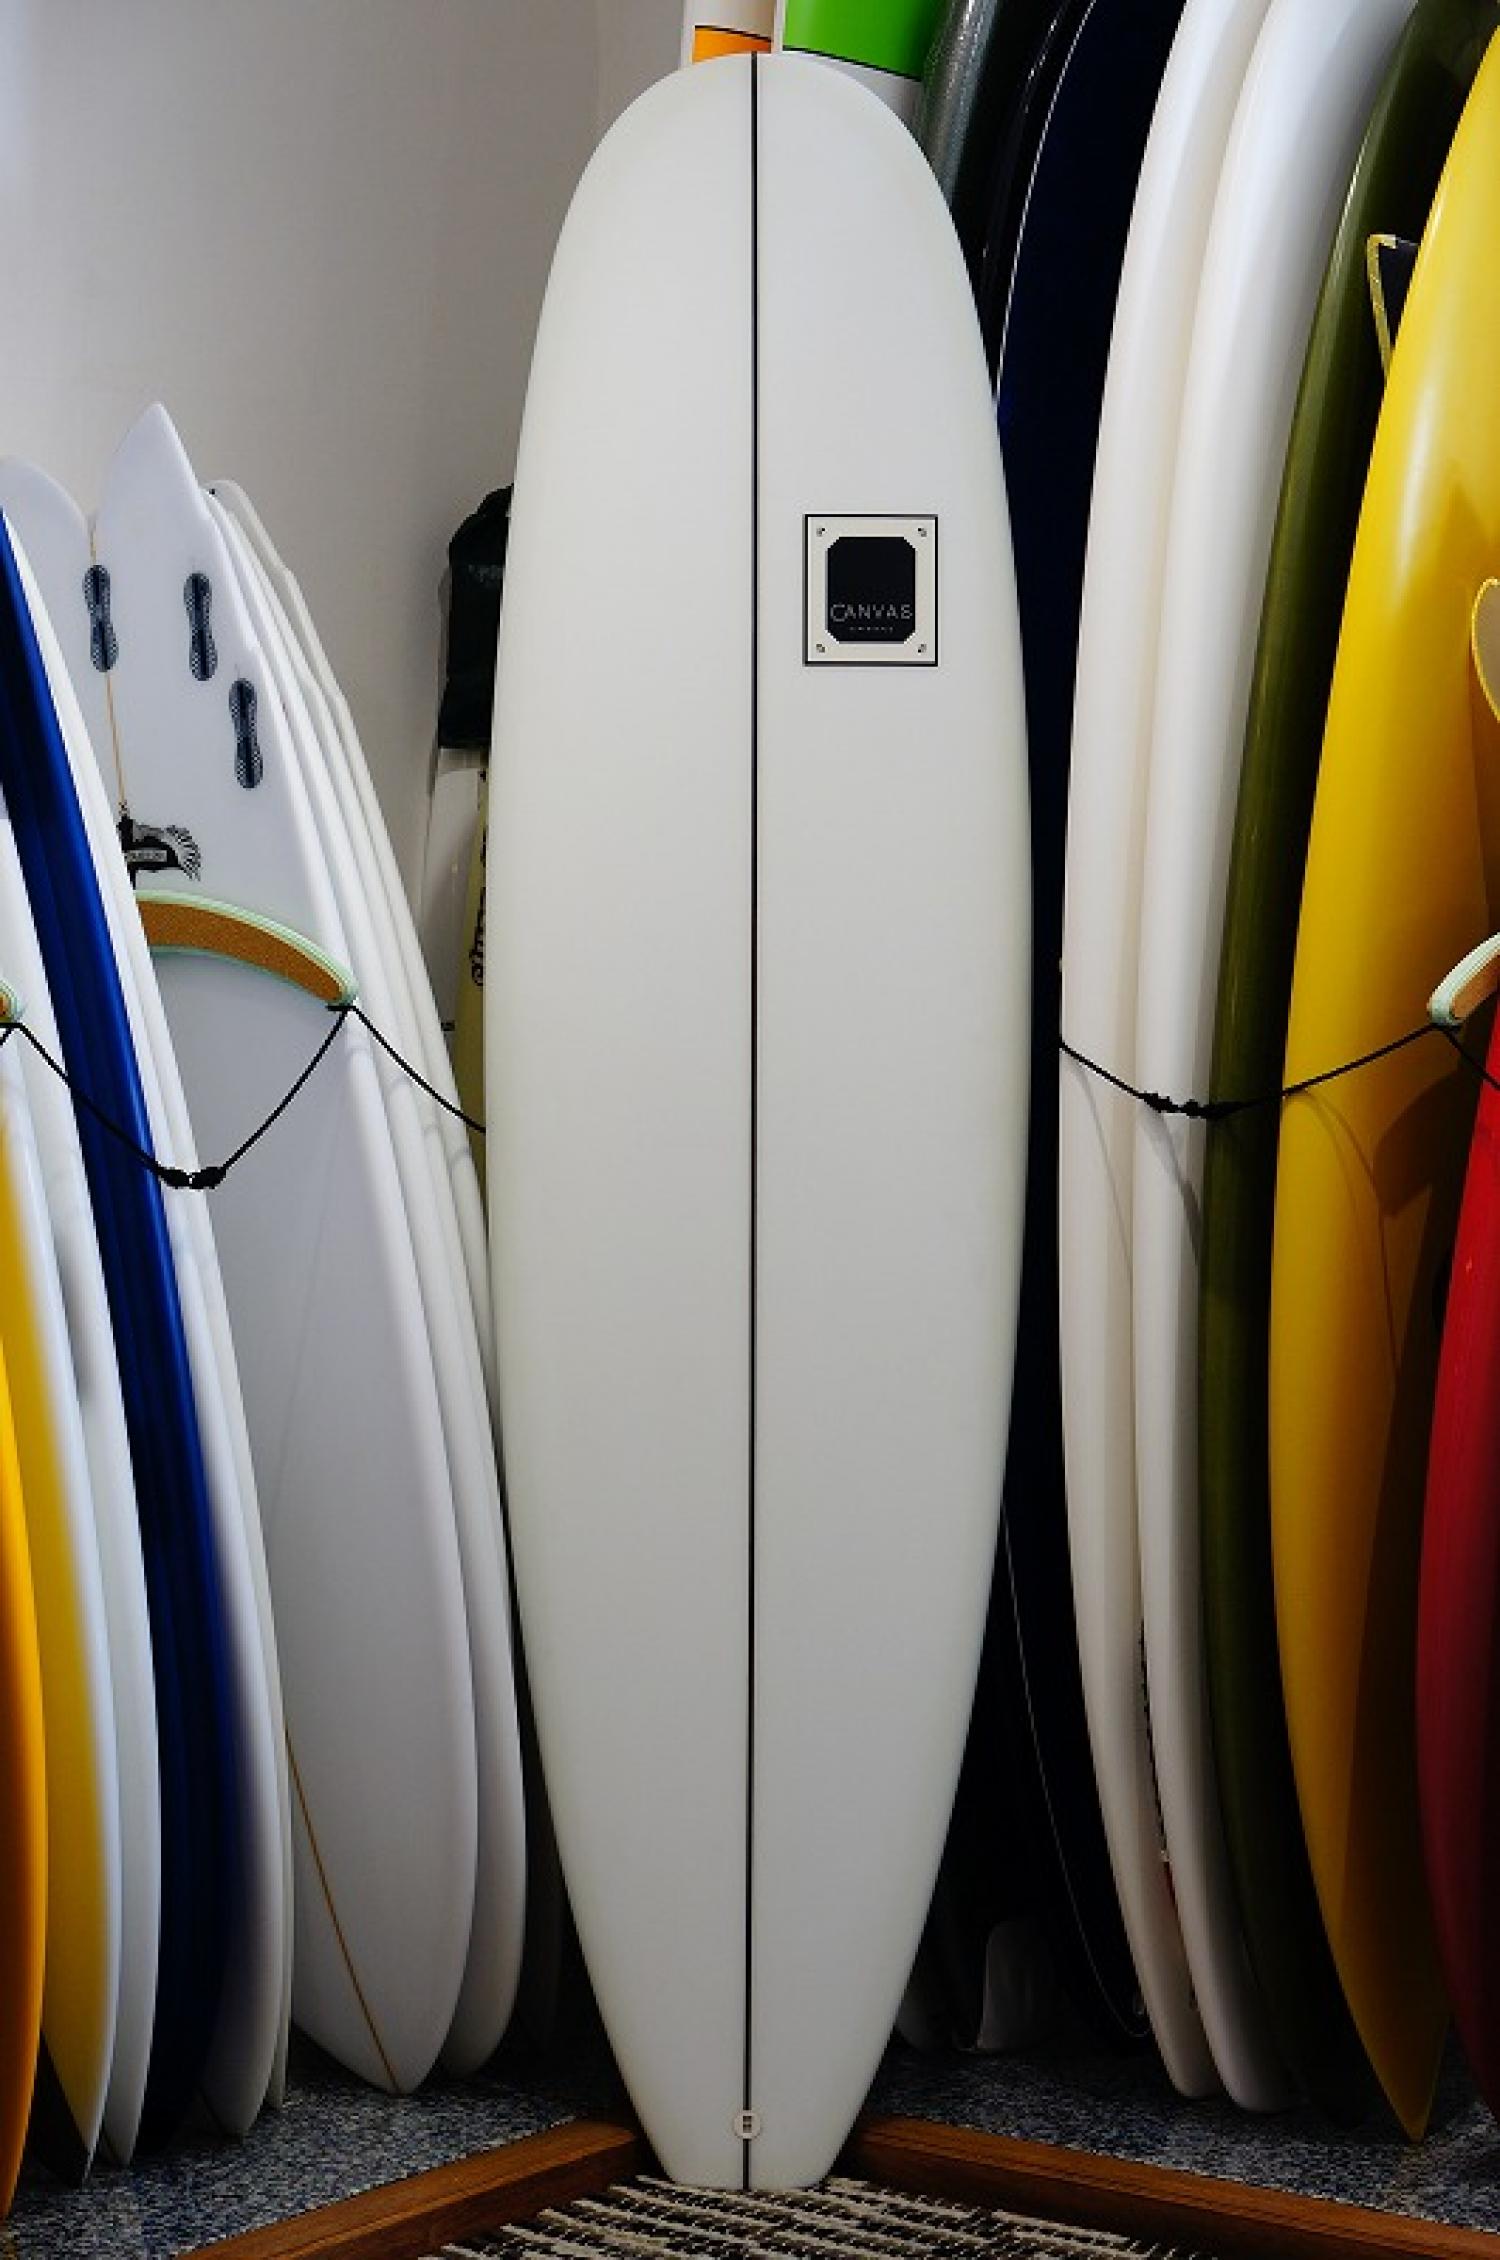 The CANVAS MINI NOSERIDER 6 '12 "two surfboards arrival